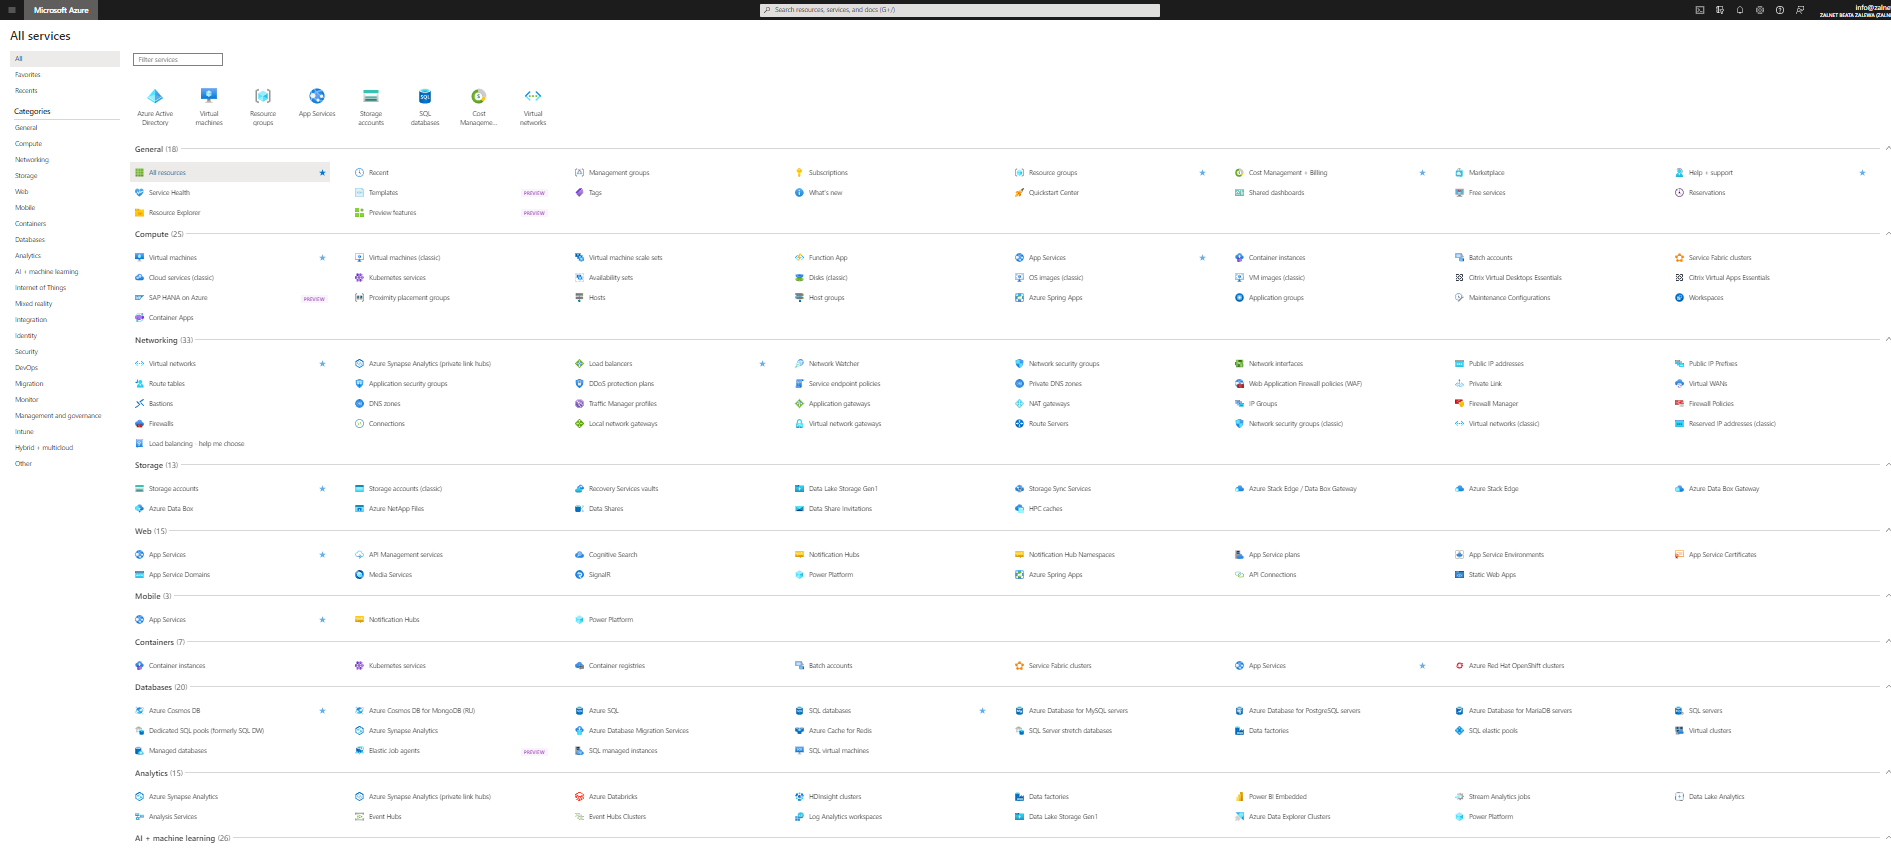 Services and features in Azure portal